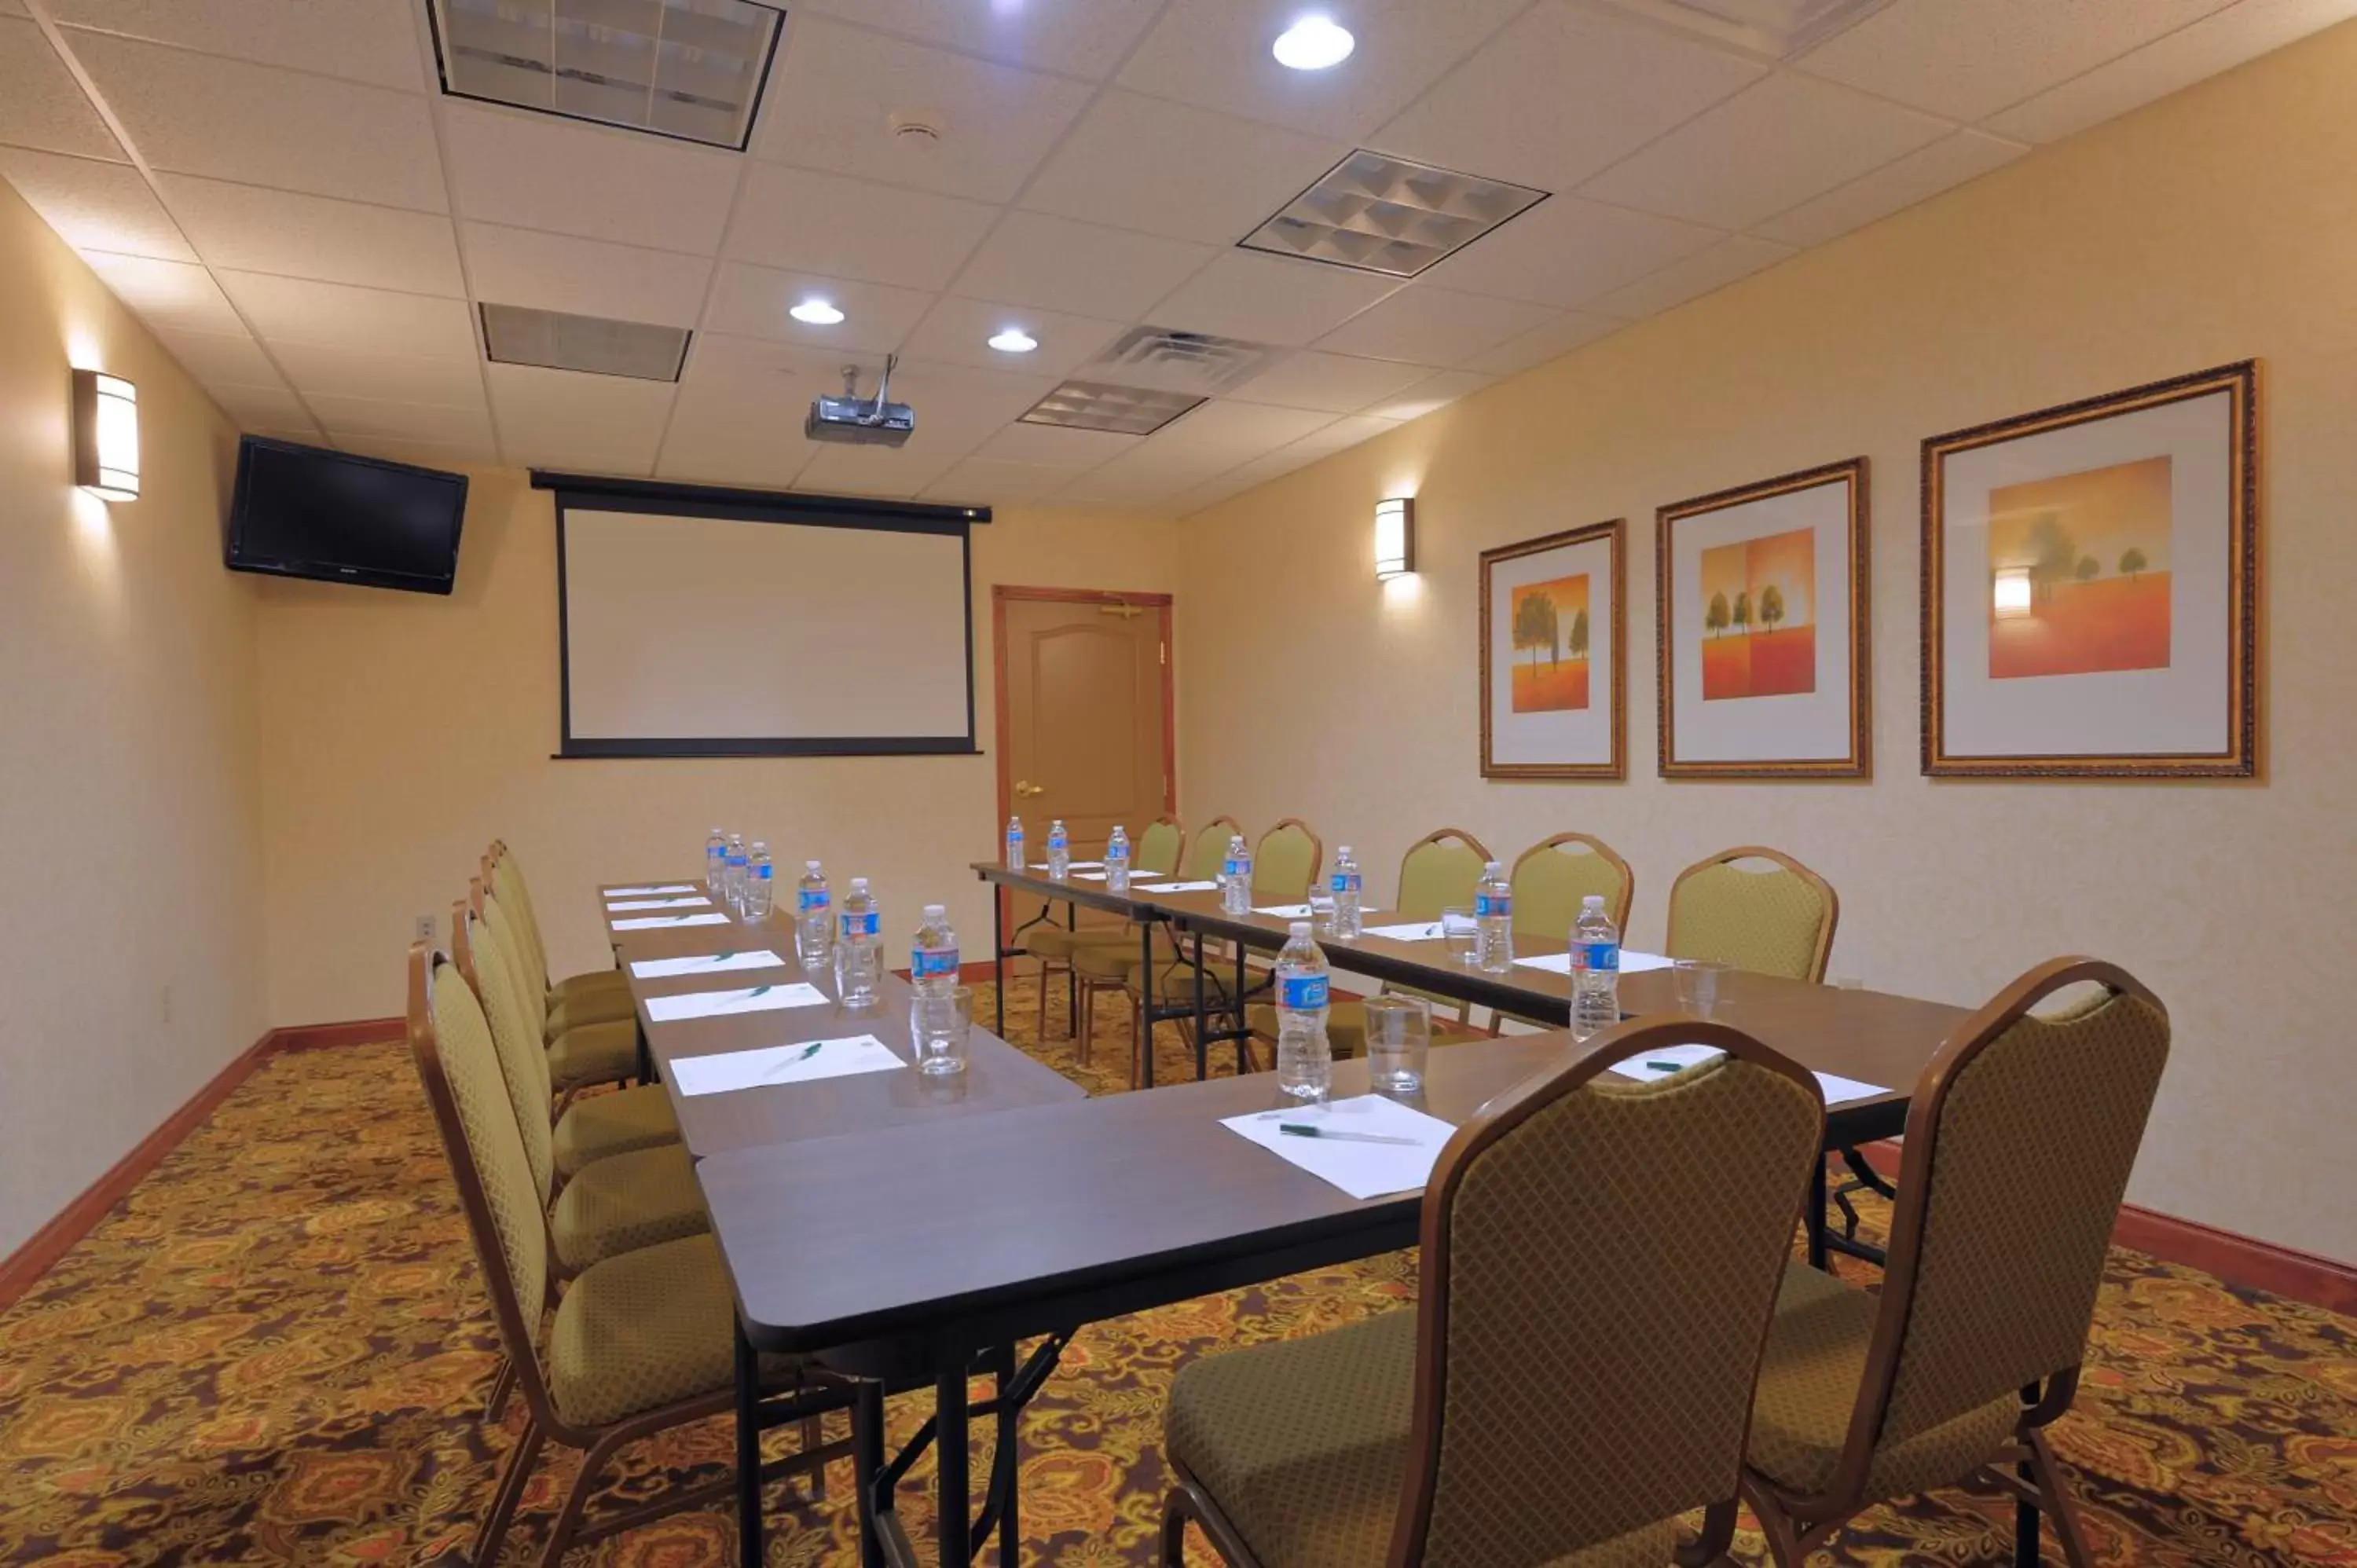 Area and facilities in Country Inn & Suites by Radisson, Washington at Meadowlands, PA